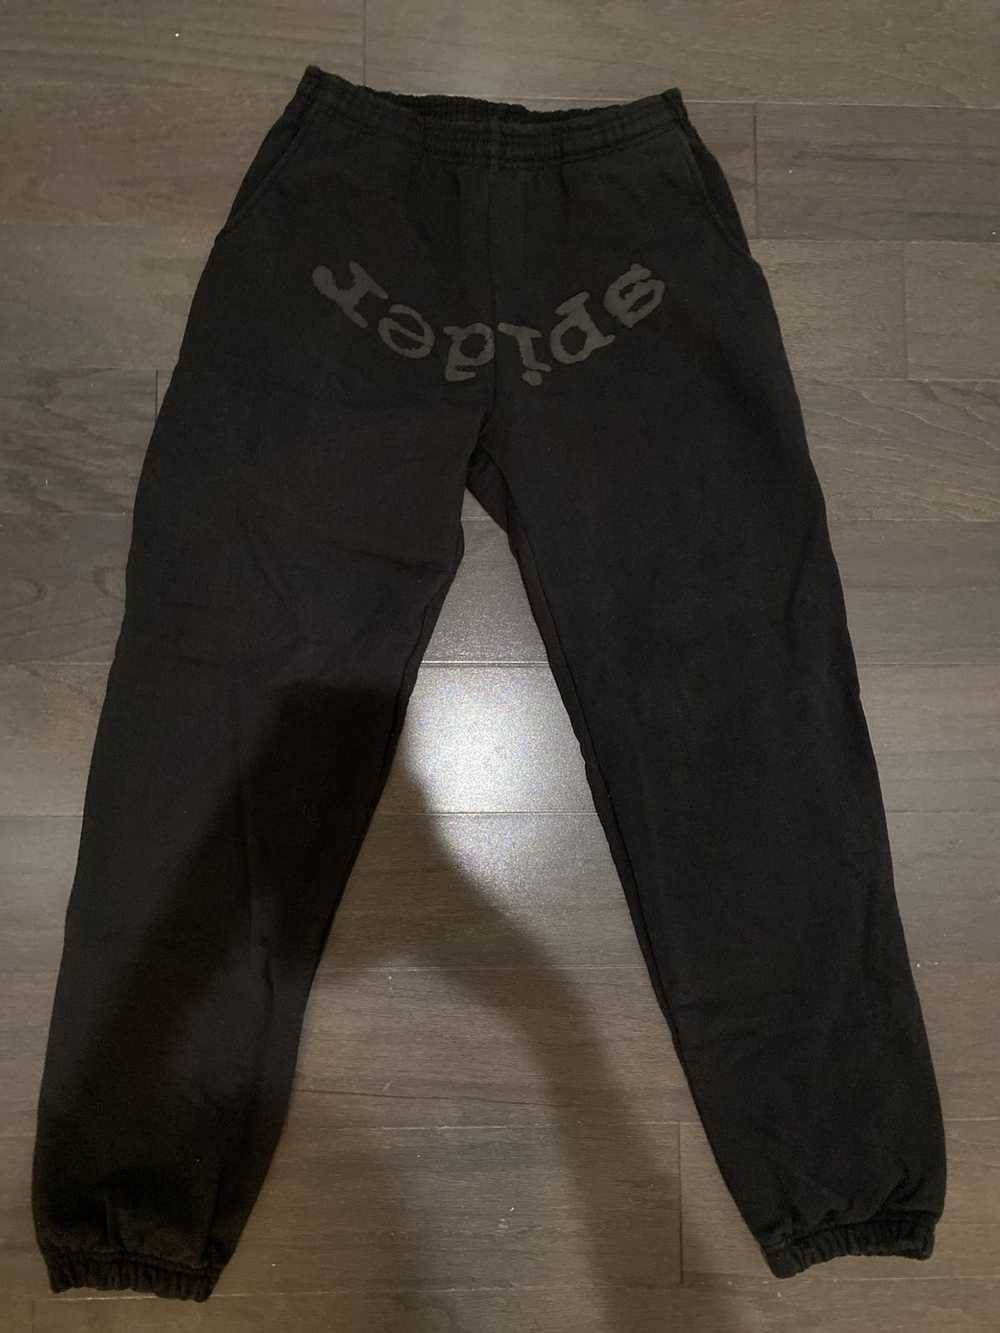 Spider Worldwide × Young Thug Spider Sweatpants - image 1